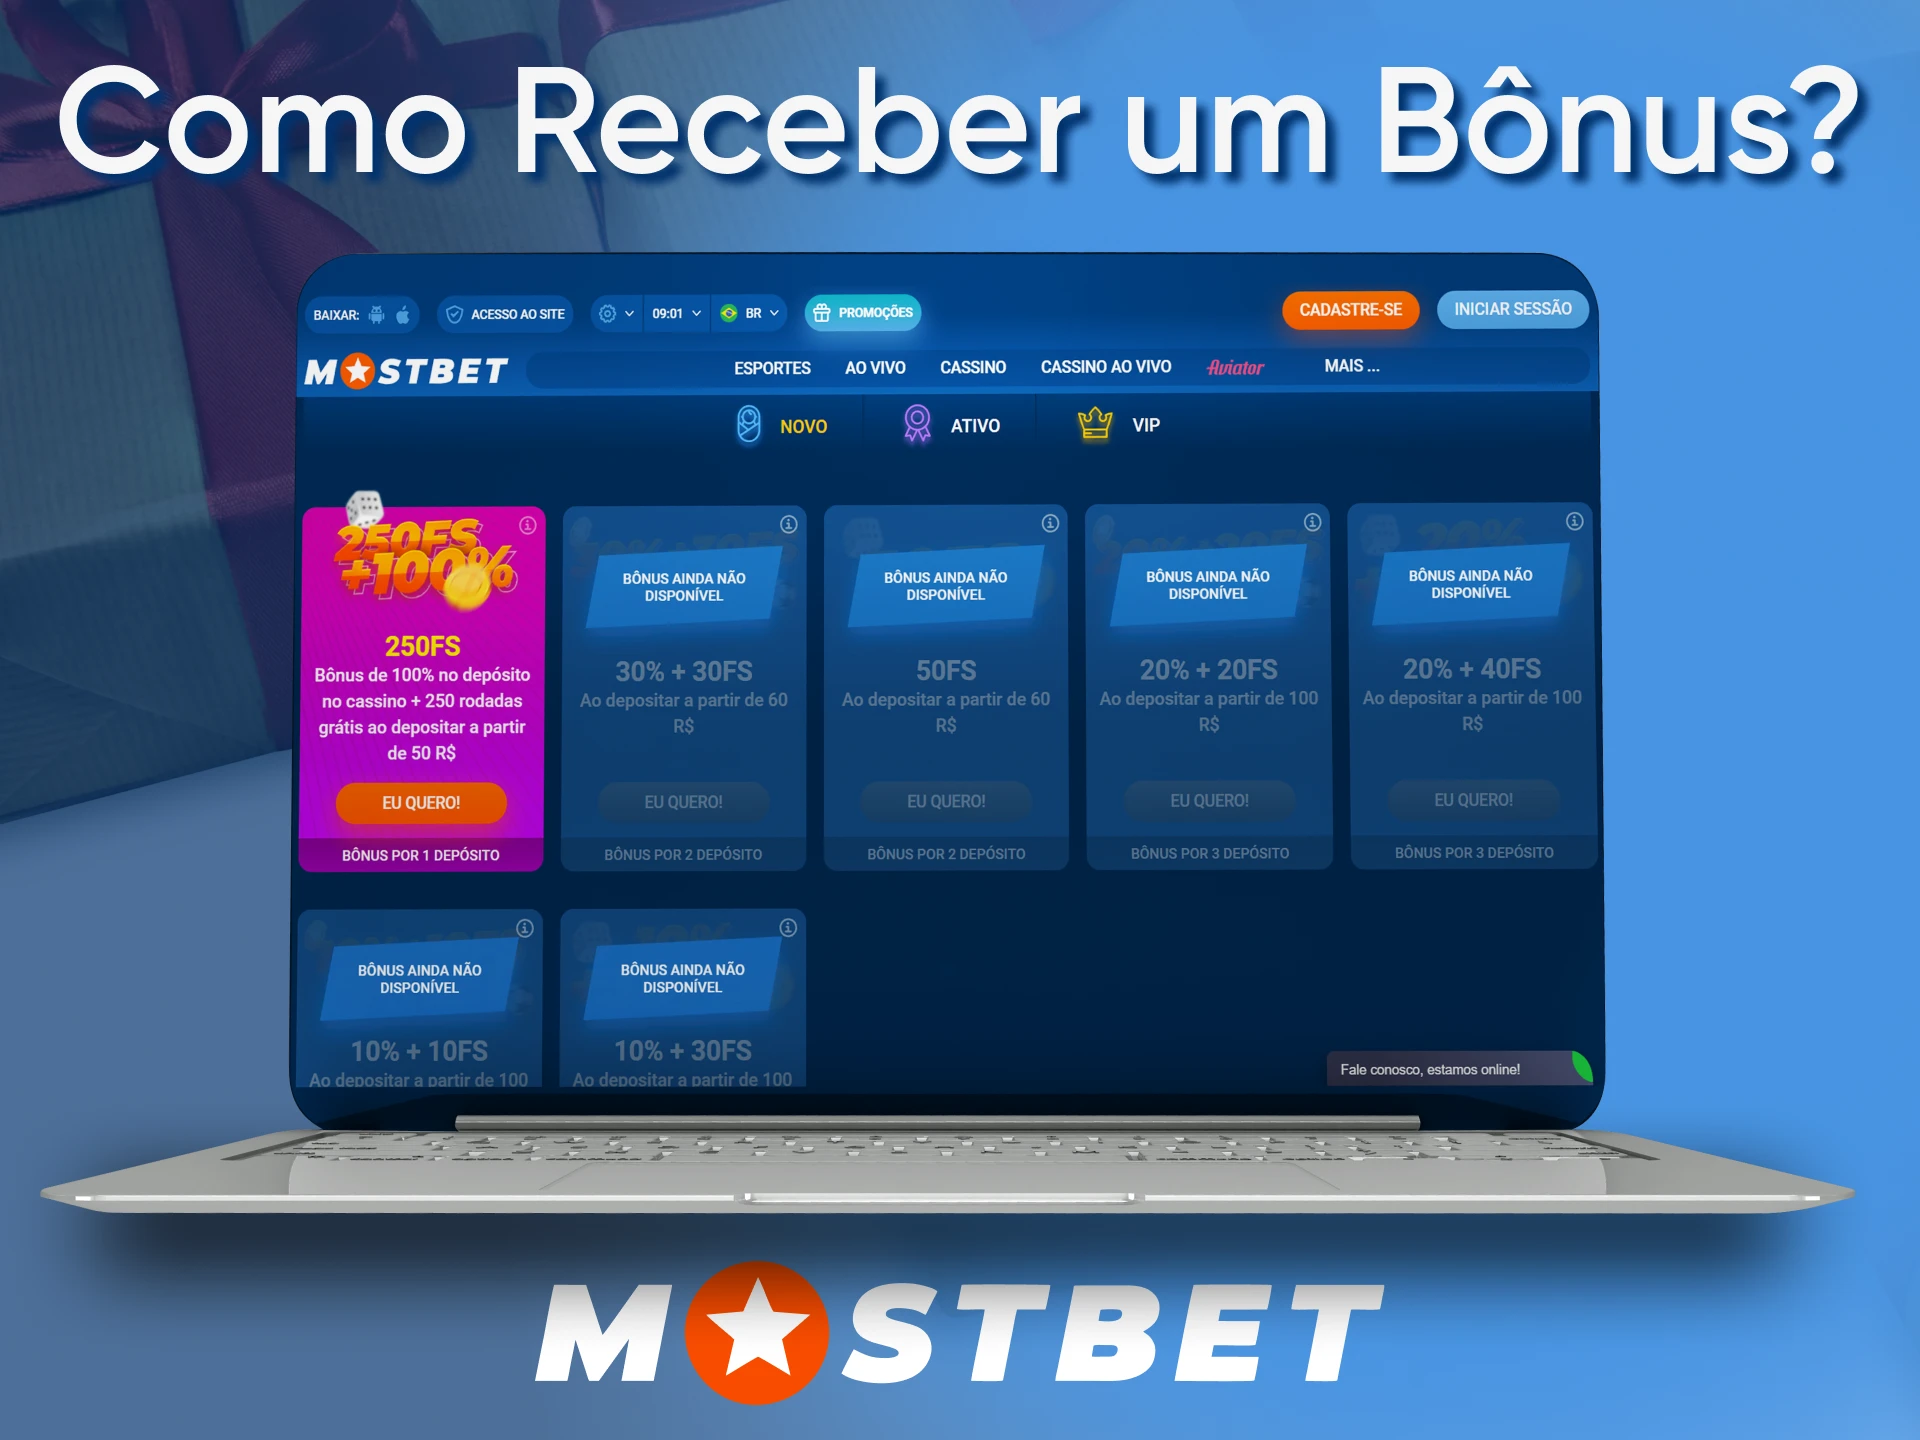 Follow the instructions to claim your Mostbet bonus.